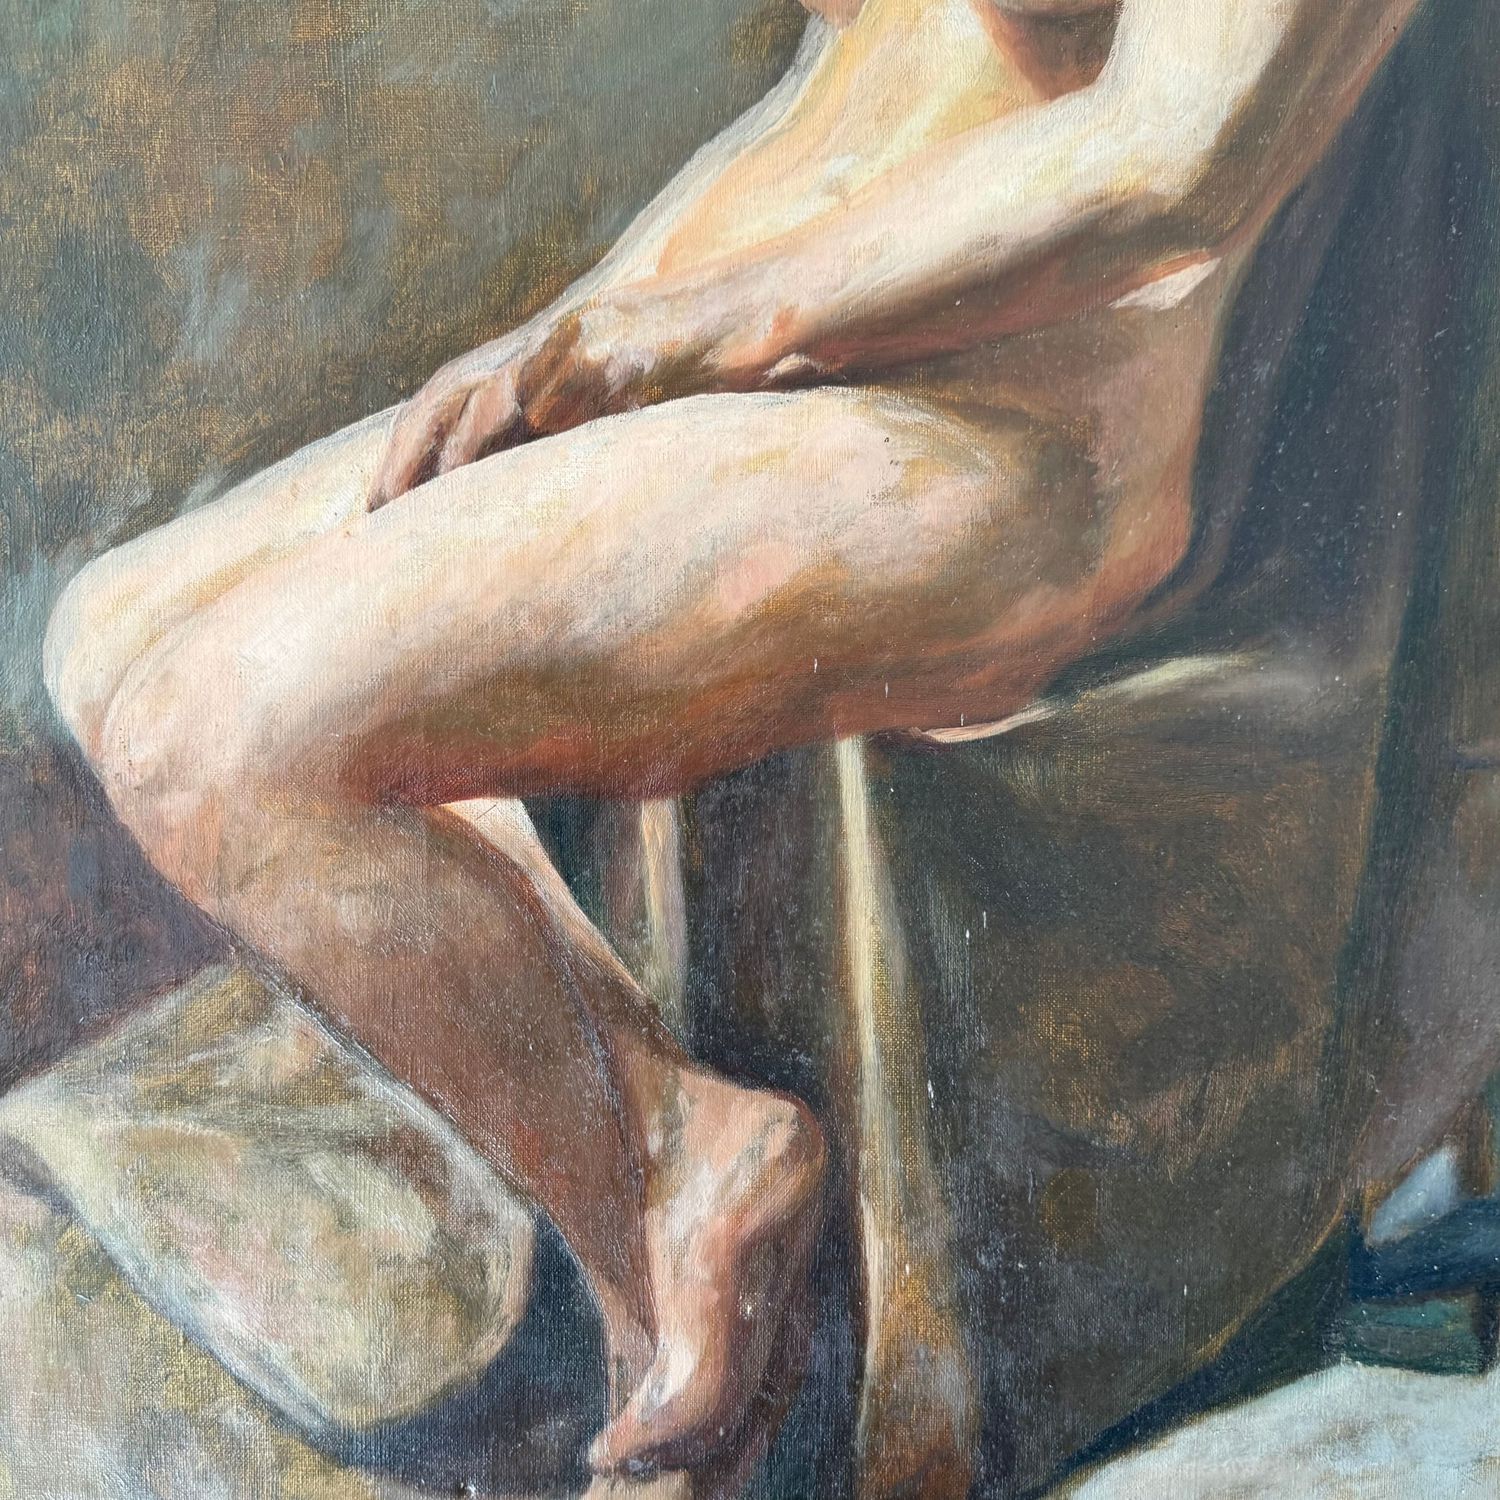 Seated nude woman - Image 5 of 7